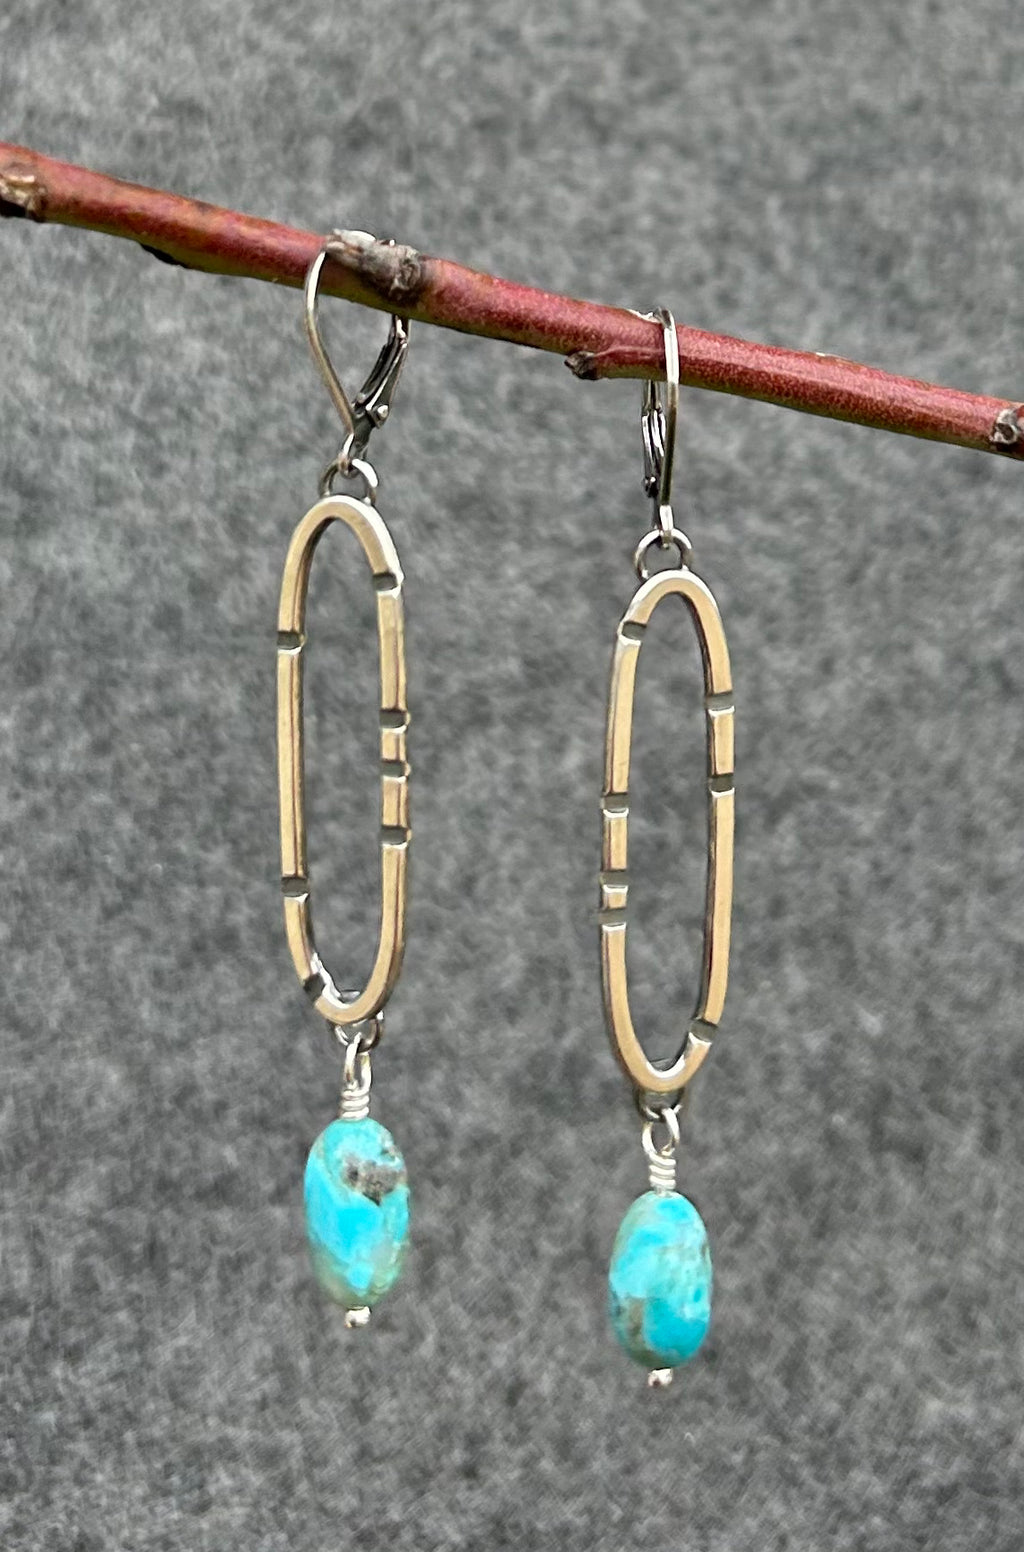 Anvil Hoop Earrings with Stamped Sterling Silver and Blue Turquoise